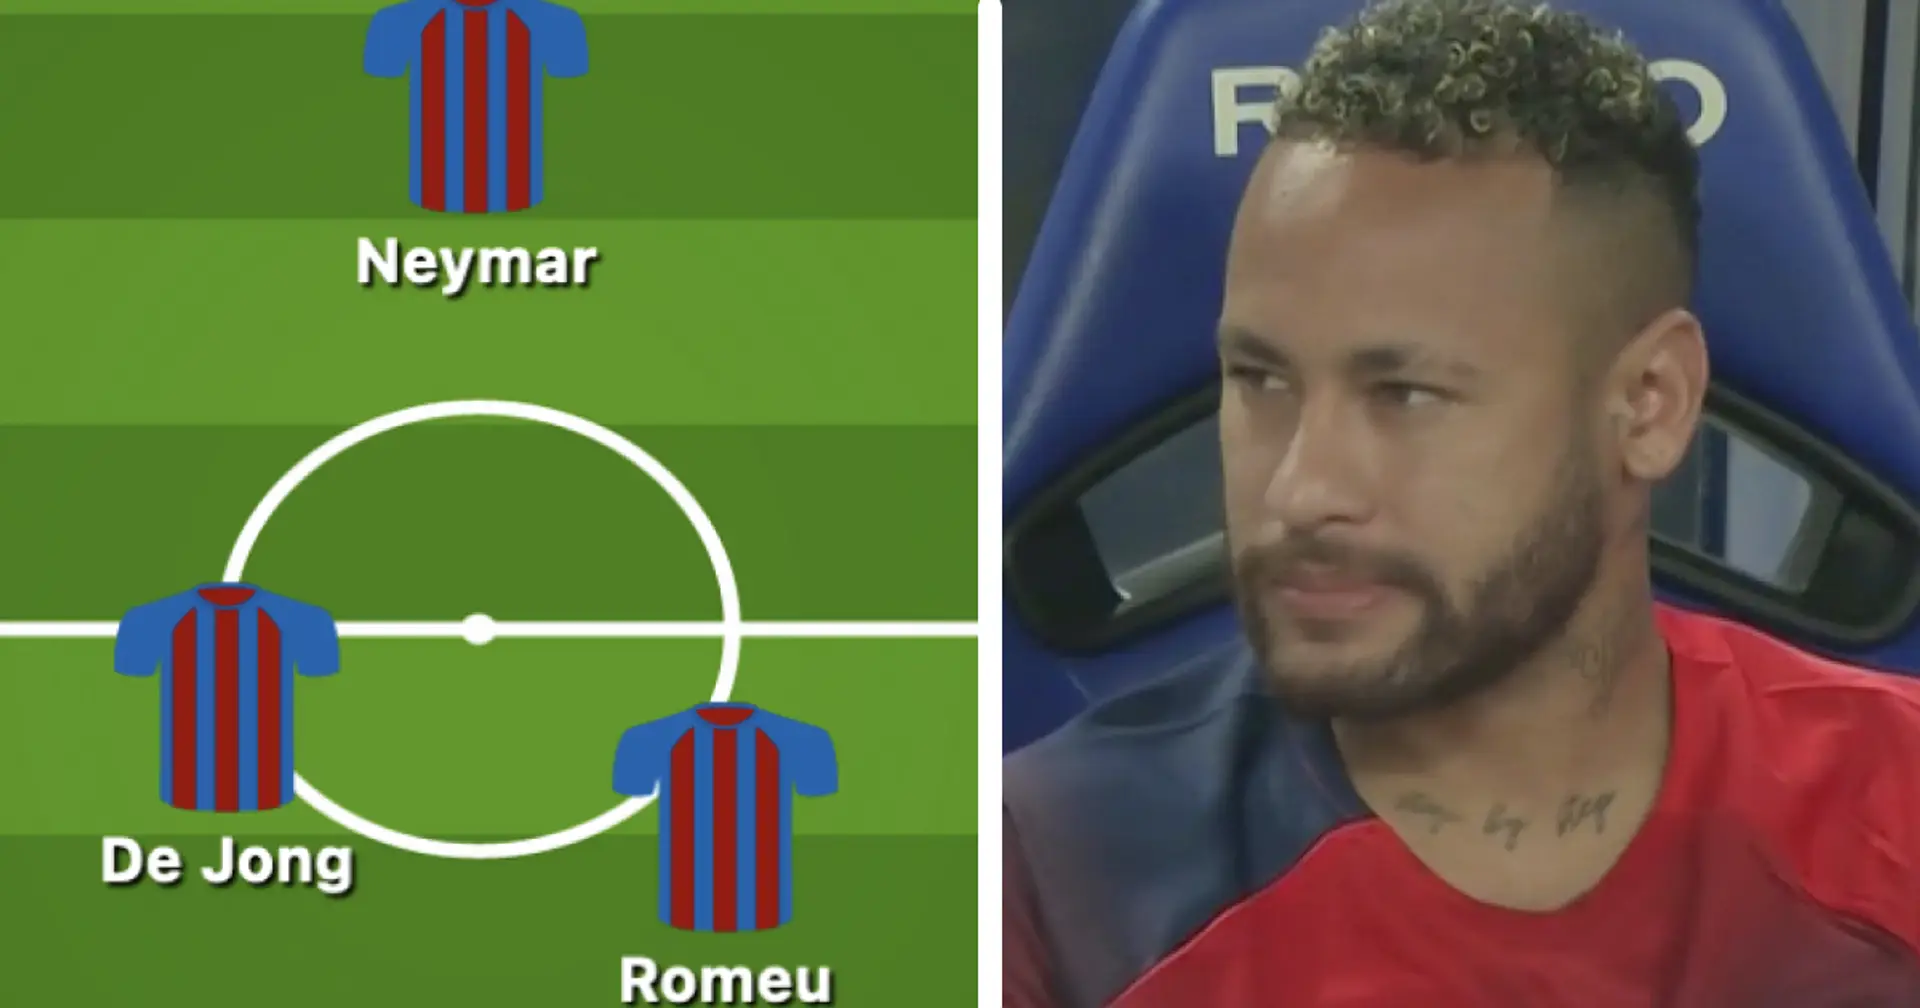 How Barca could line up with Neymar: 3 options